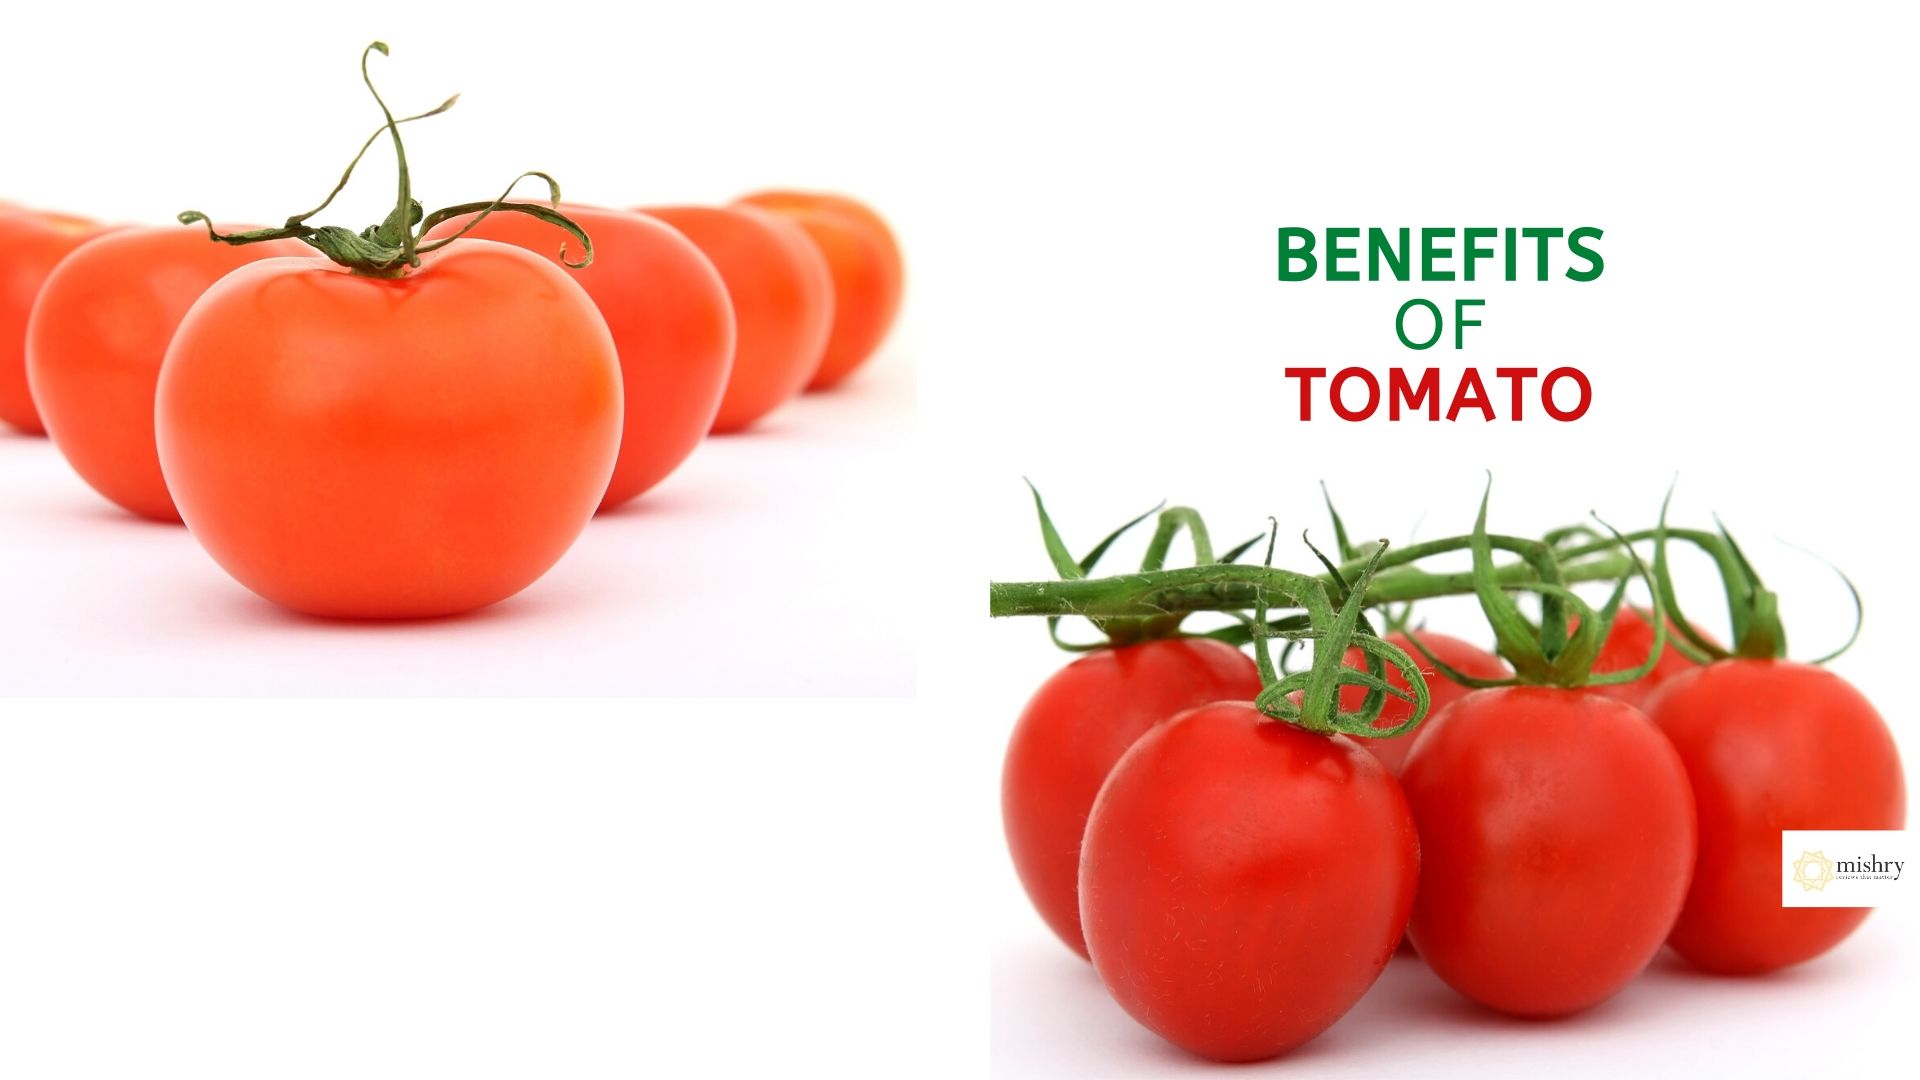 Benefits Of Tomato Incredible Benefits Of This Fruit You May Not Have Known